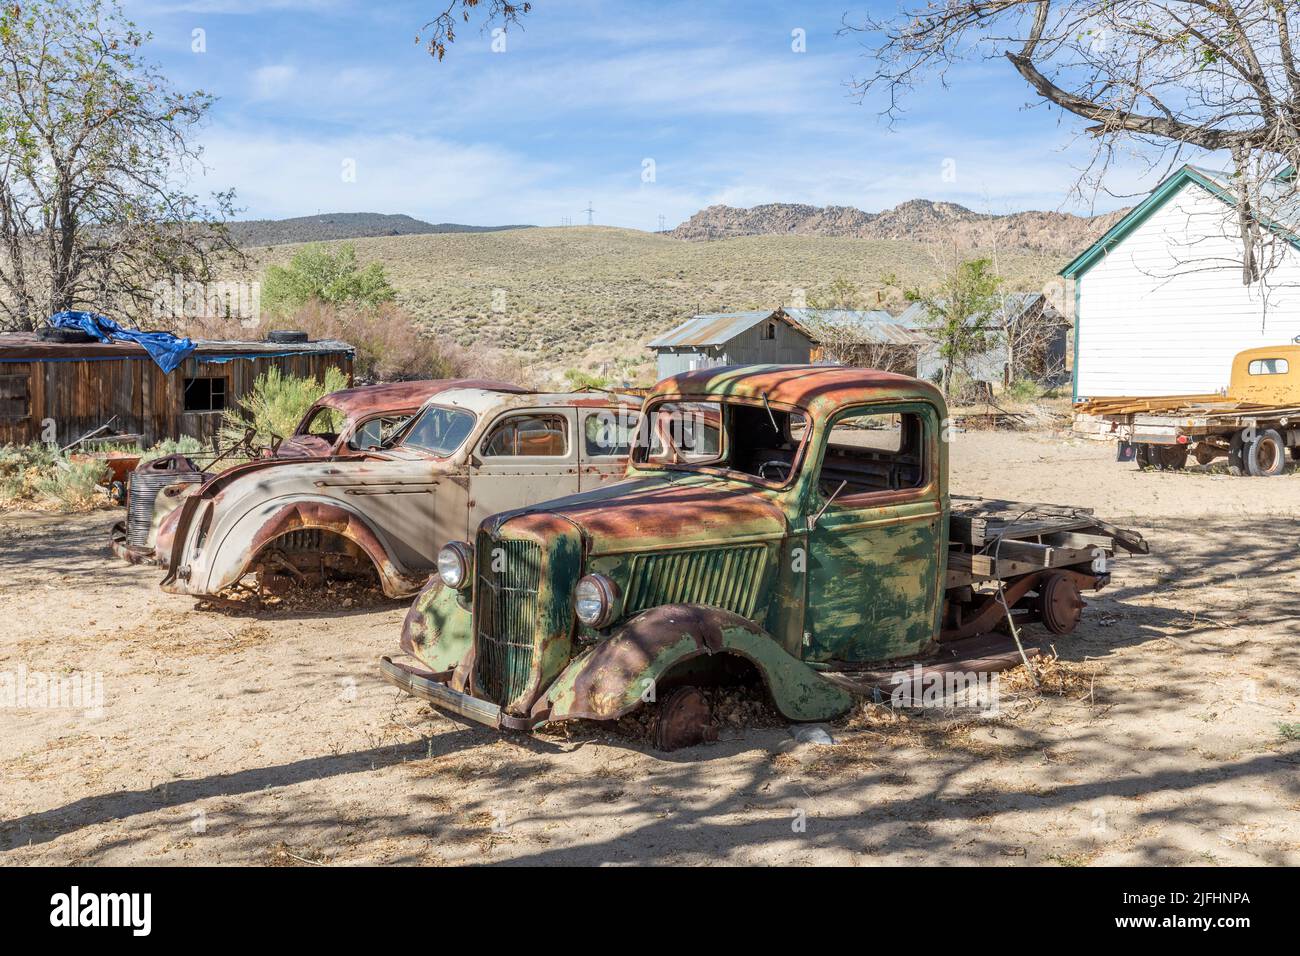 Benton hot Springs, USA - June 3, 2022: old vintage rusty car wrecks at an old abandoned farm in USA Stock Photo